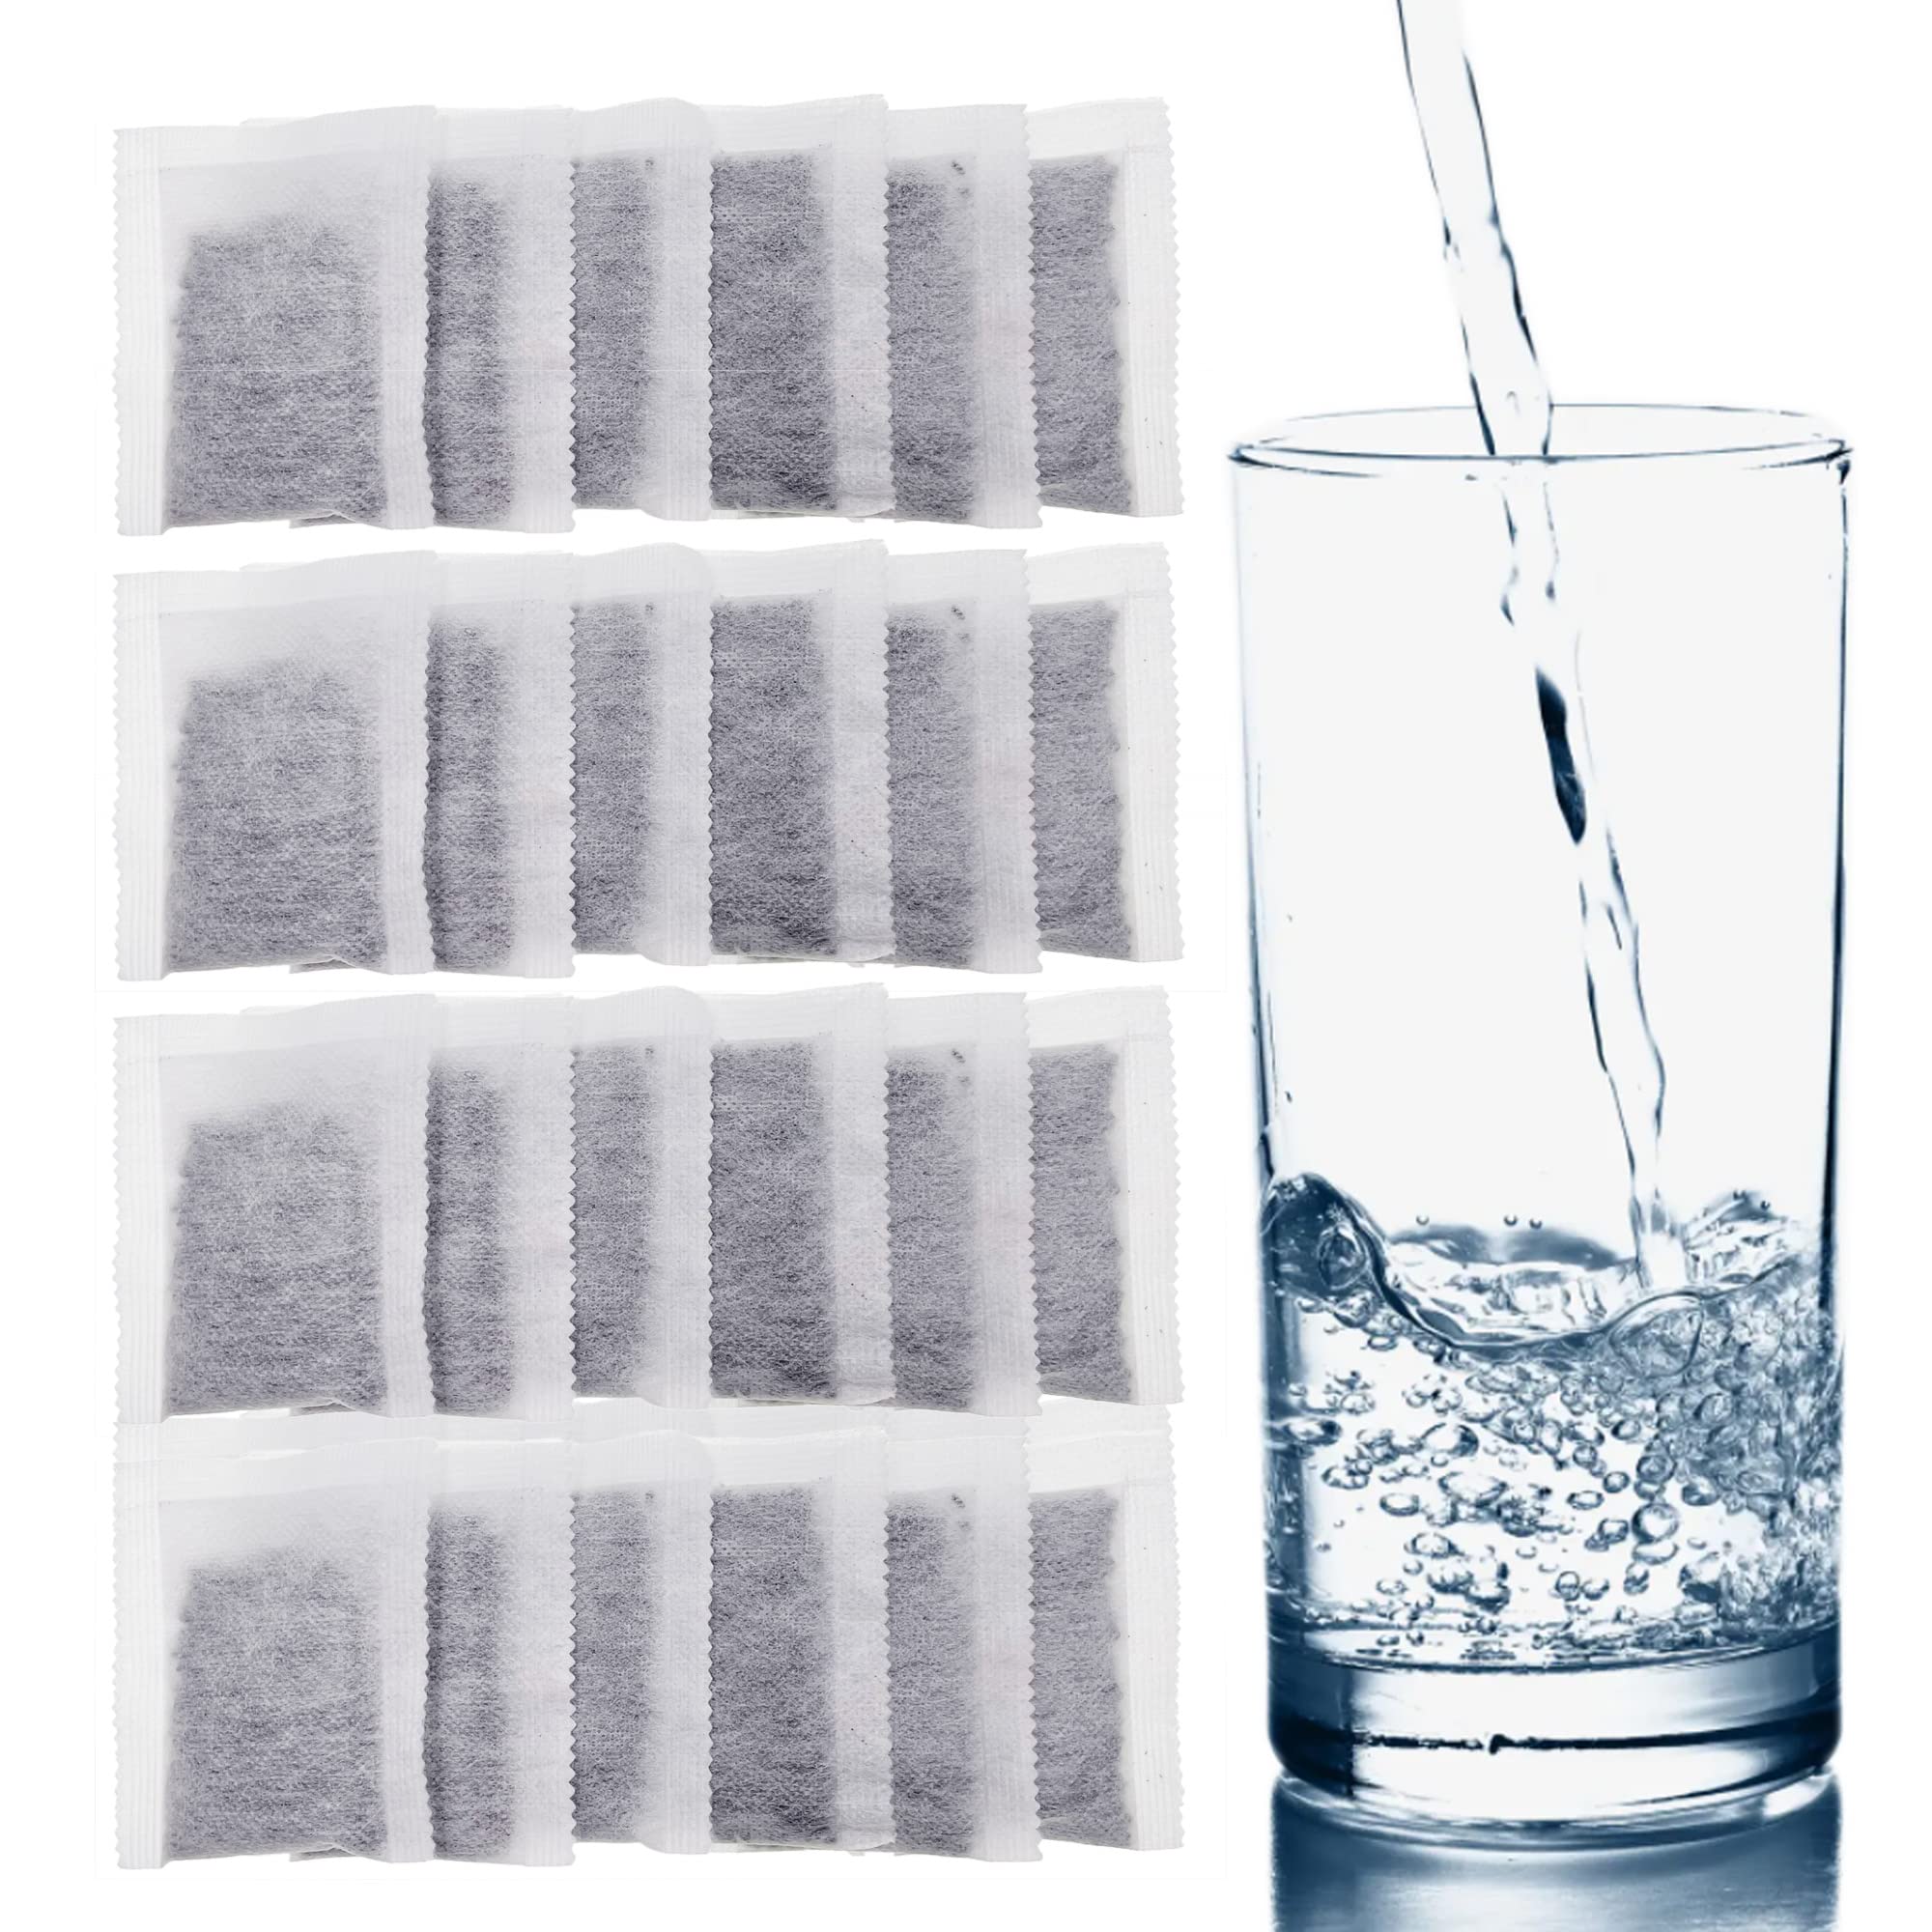 12 Pack Activated Charcoal Distiller Filters -Coconut Shell Activated Carbon Filter Sachets -Compatible with Megahome and other Countertop Distillers